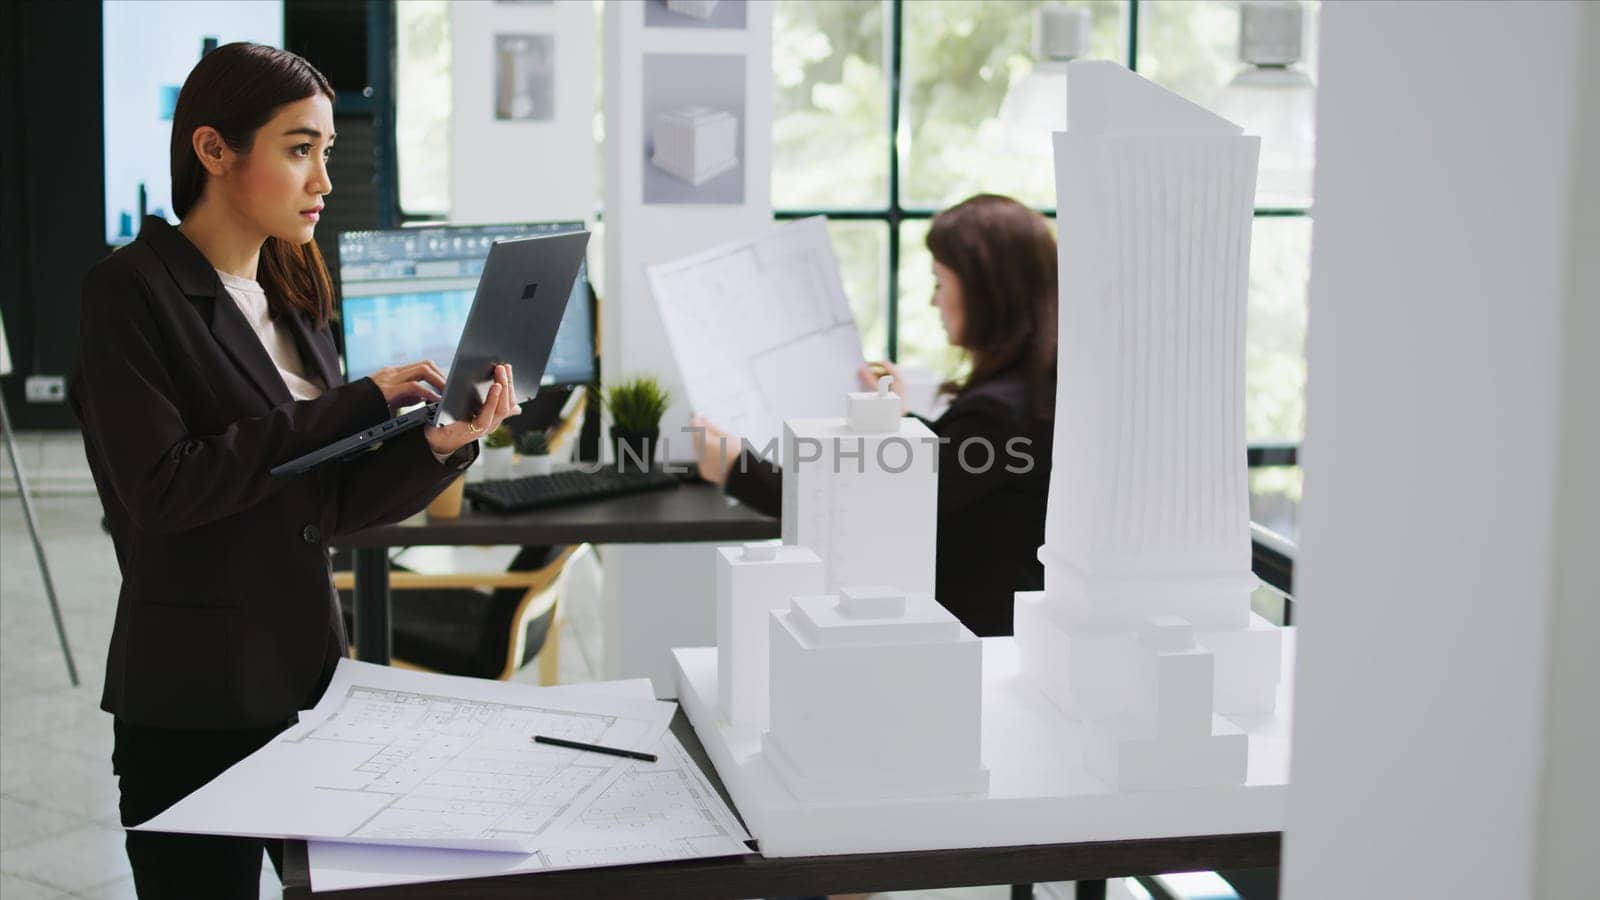 Asian contractor takes notes about 3d printed model on laptop, examining outline and scale of building maquette in architectural agency office. Cad specialist measuring layout for new project.